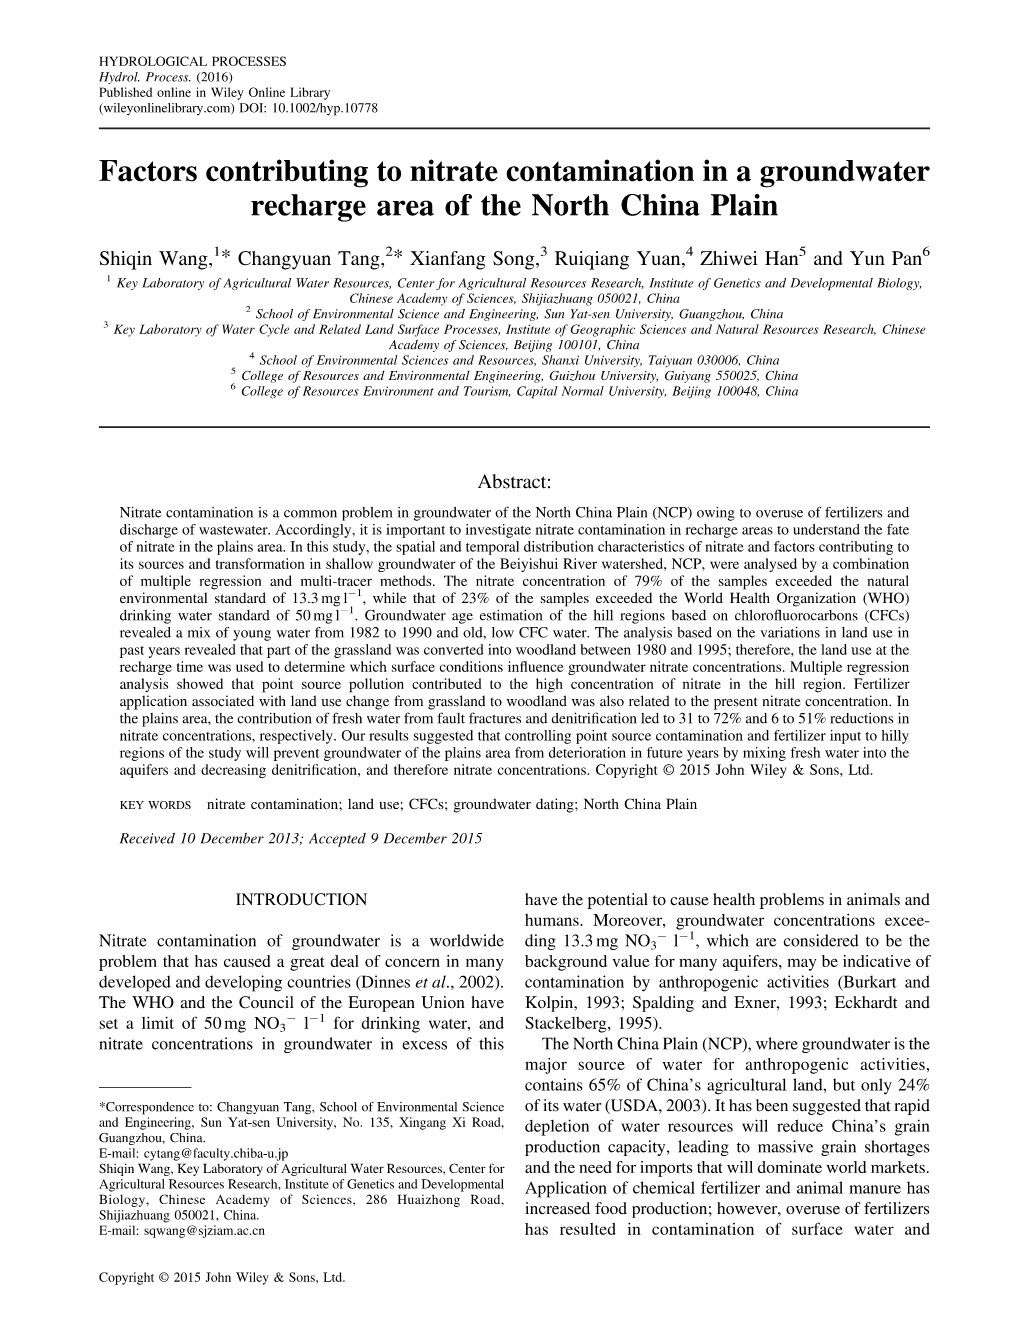 Factors Contributing to Nitrate Contamination in a Groundwater Recharge Area of the North China Plain